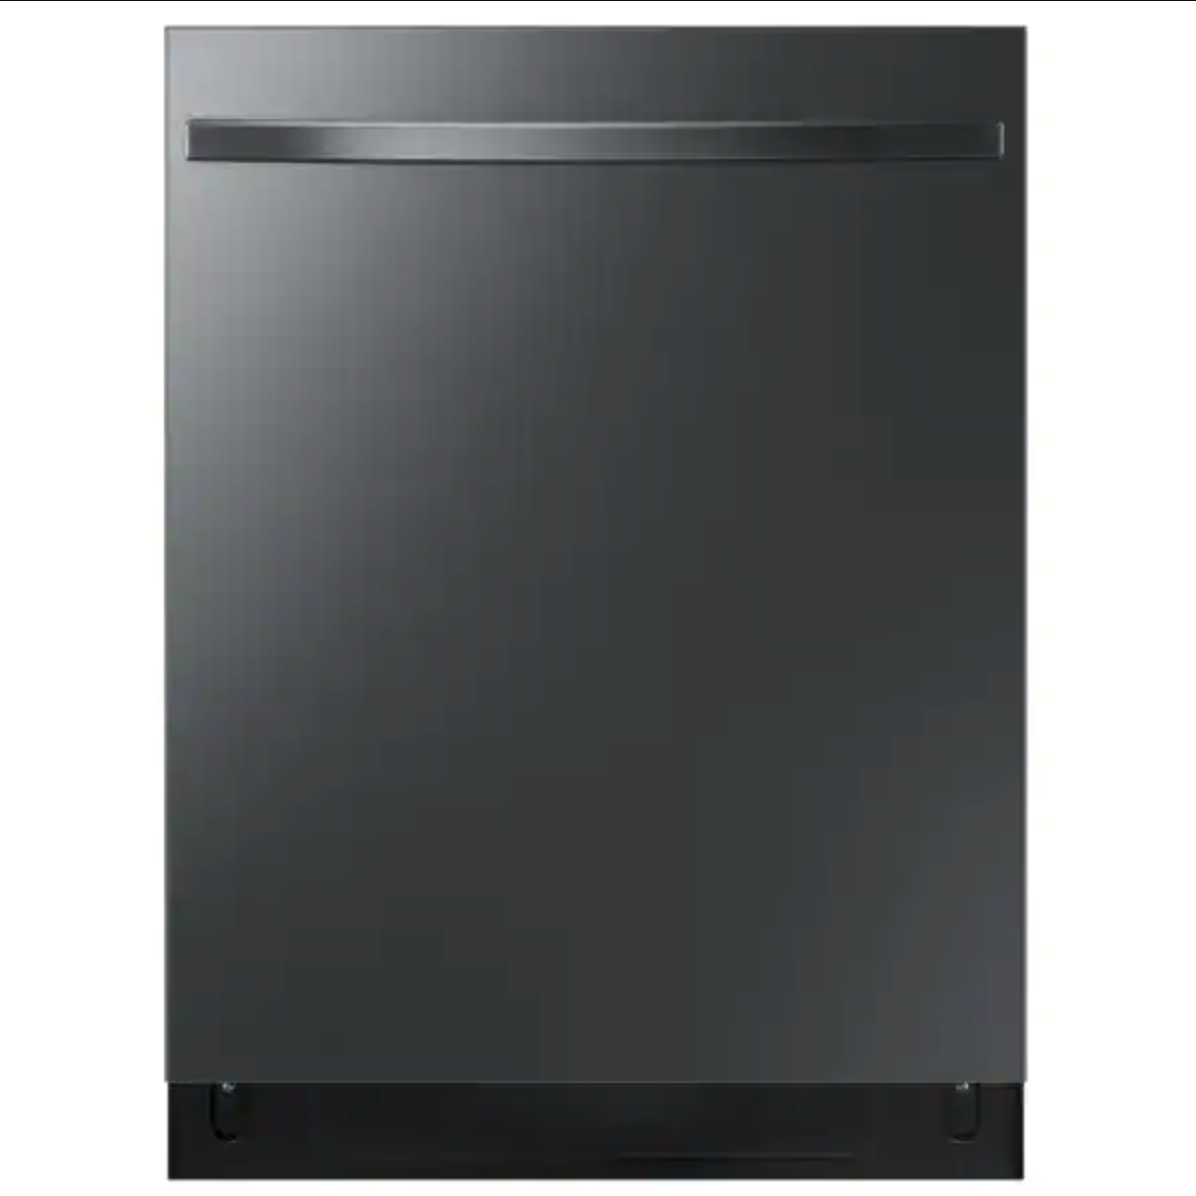 Samsung - StormWash 24" Top Control Built-In Dishwasher with AutoRelease Dry